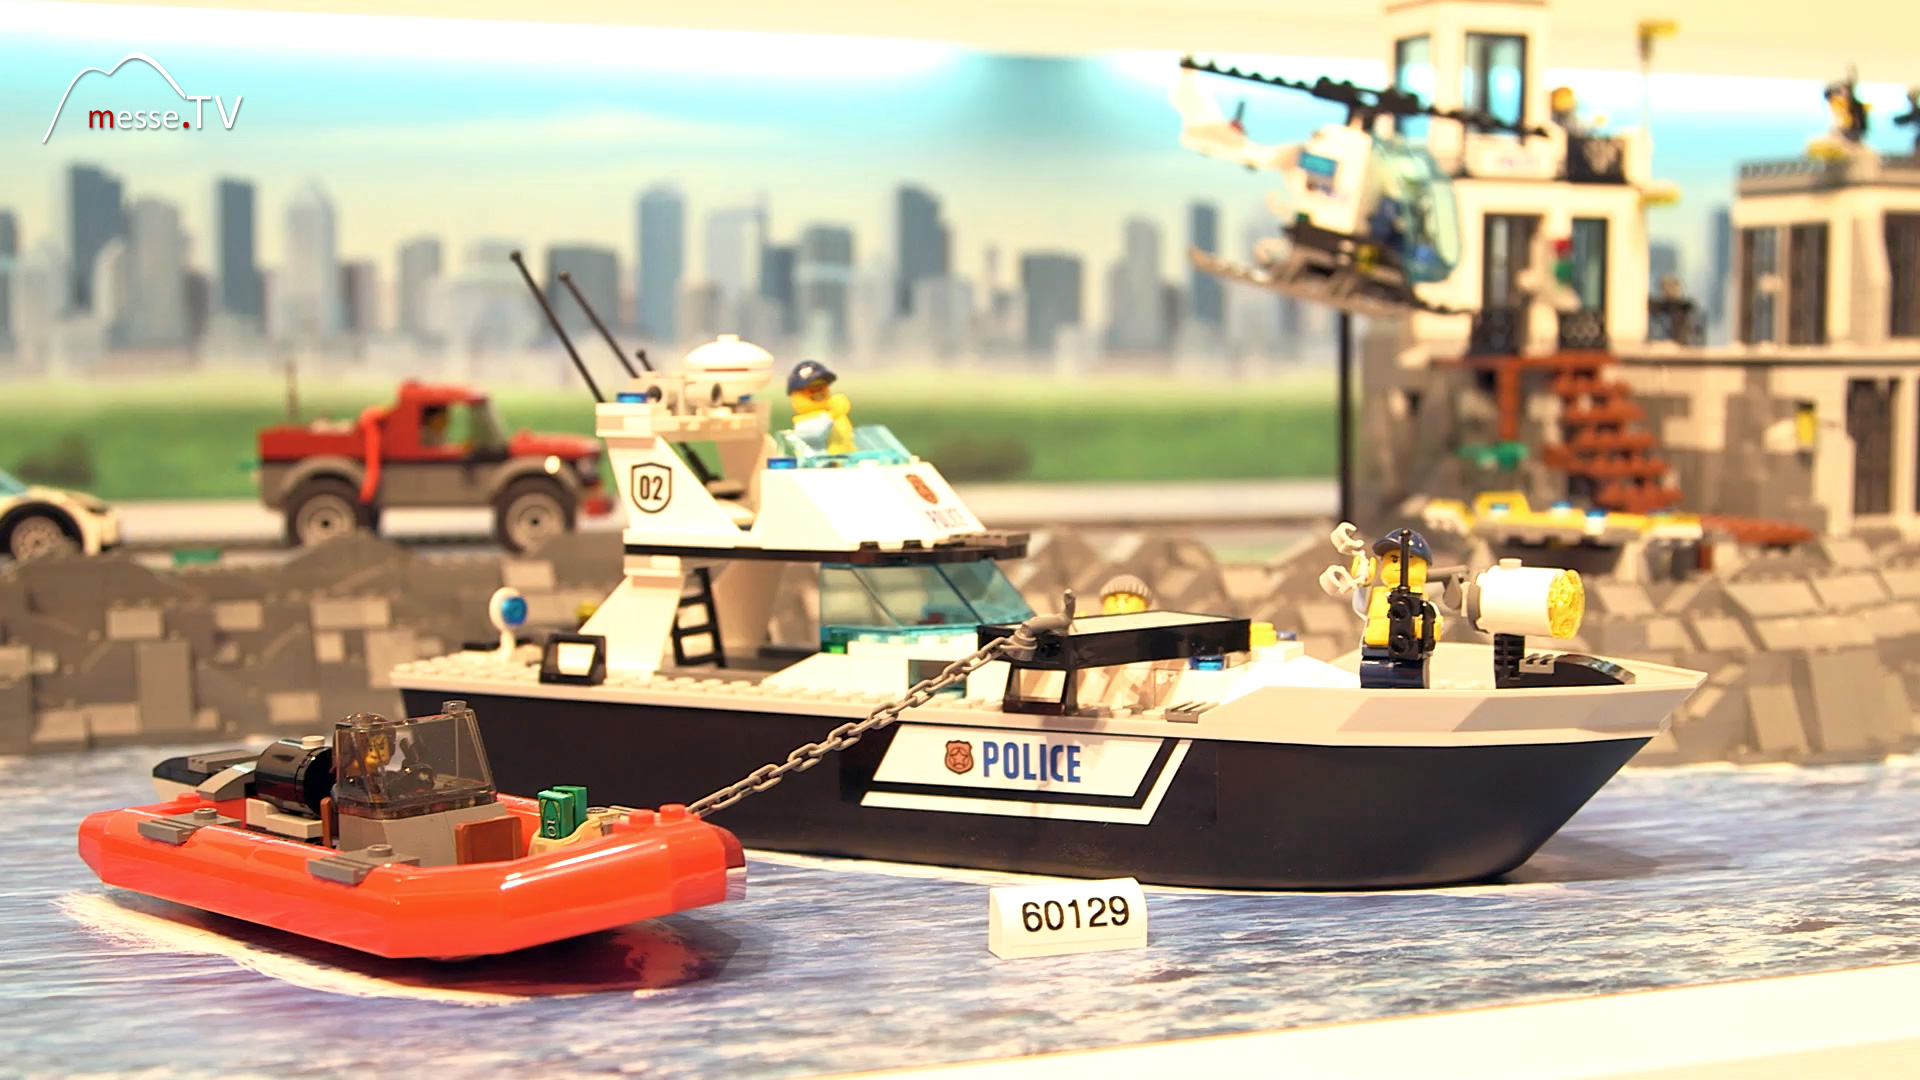 Police ship toy